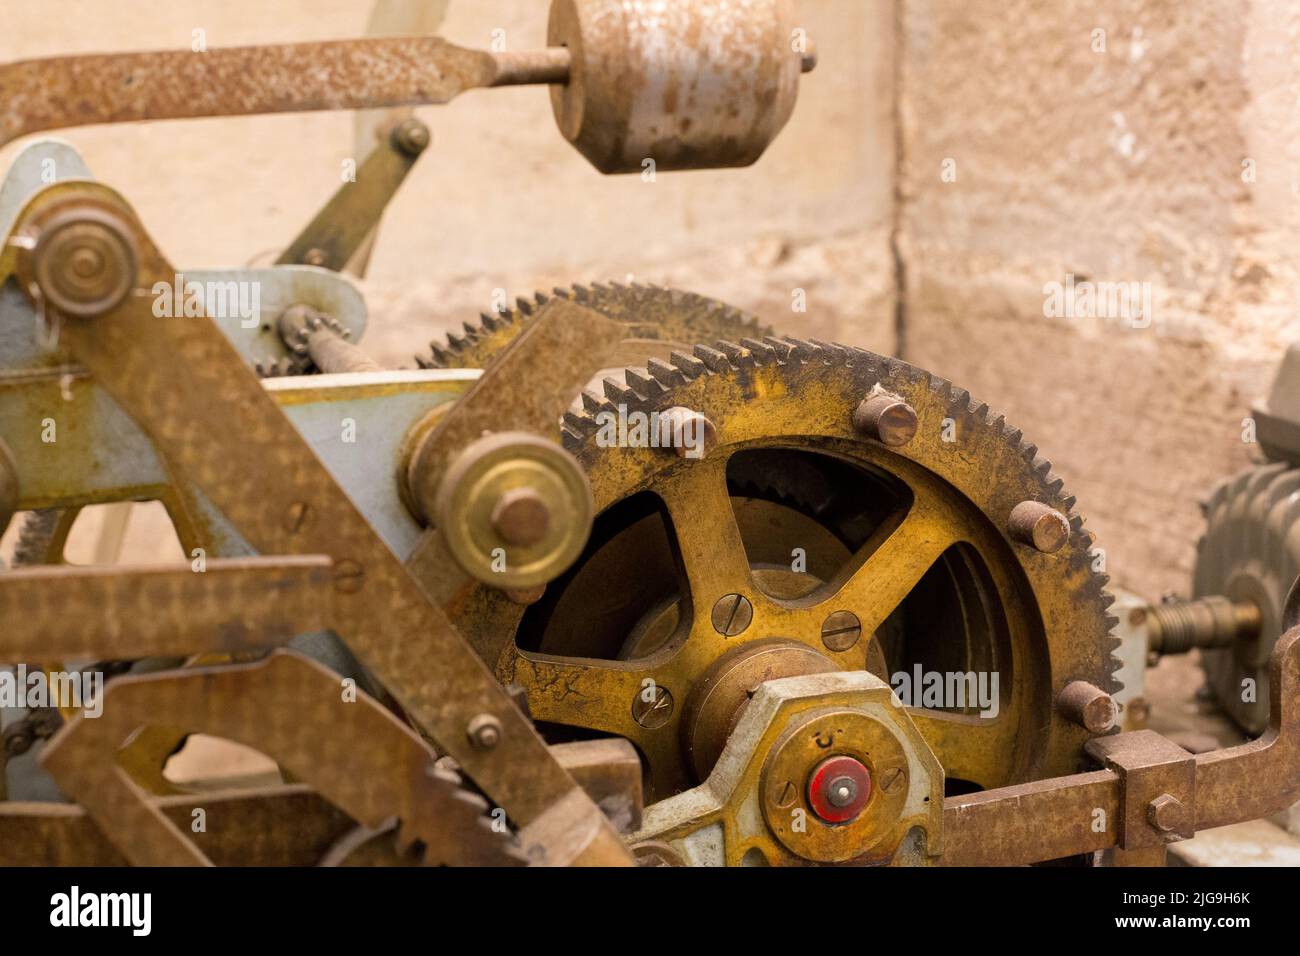 Antique watch machinery in good working order and very well preserved. Stock Photo